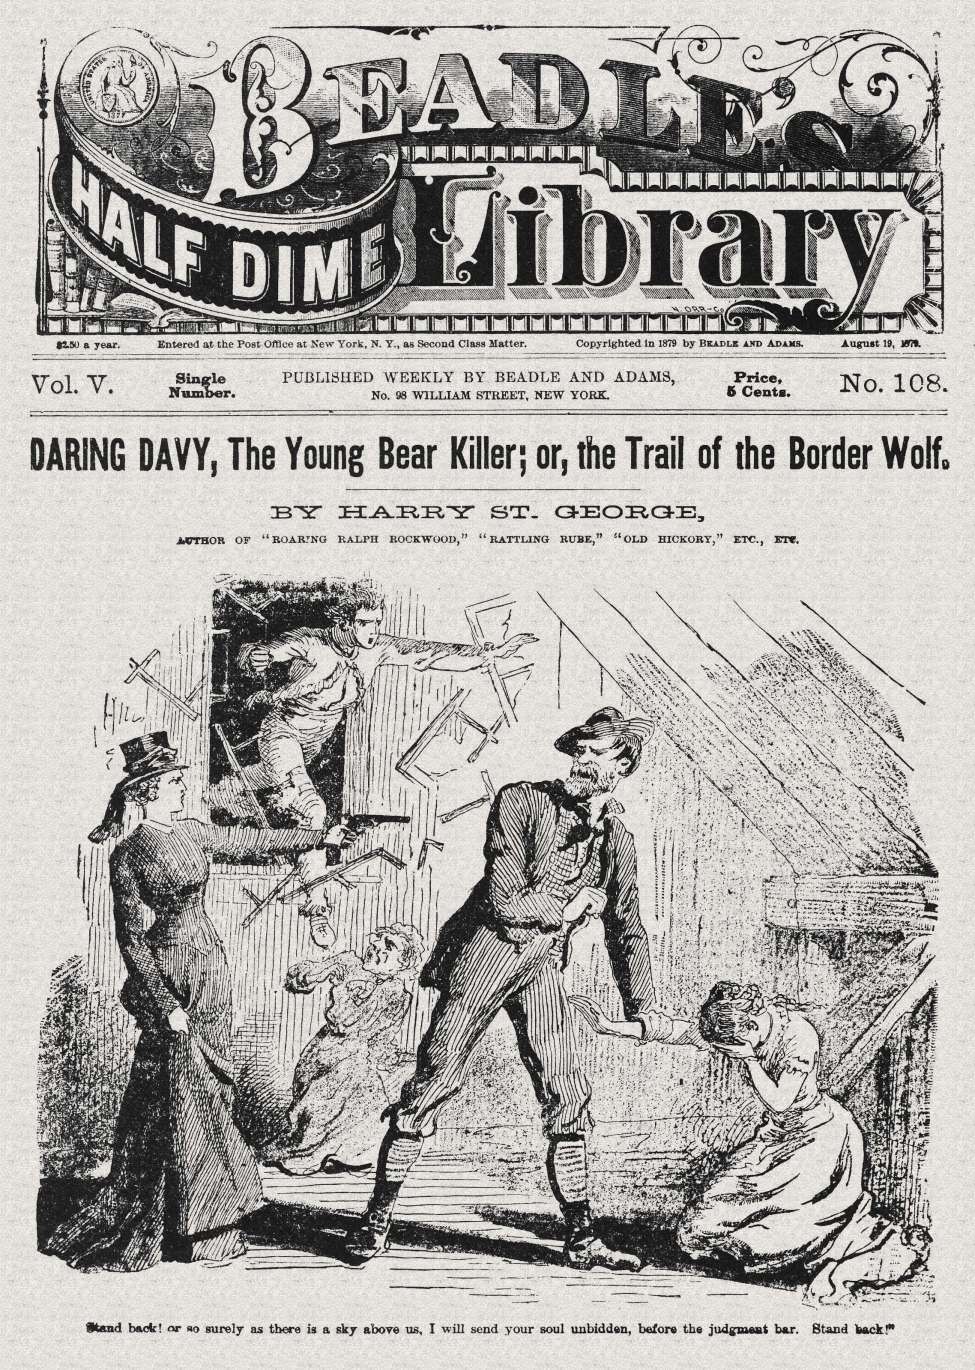 Comic Book Cover For Beadle's Half Dime Library 108 - Daring Davy, The Young Bear Killer